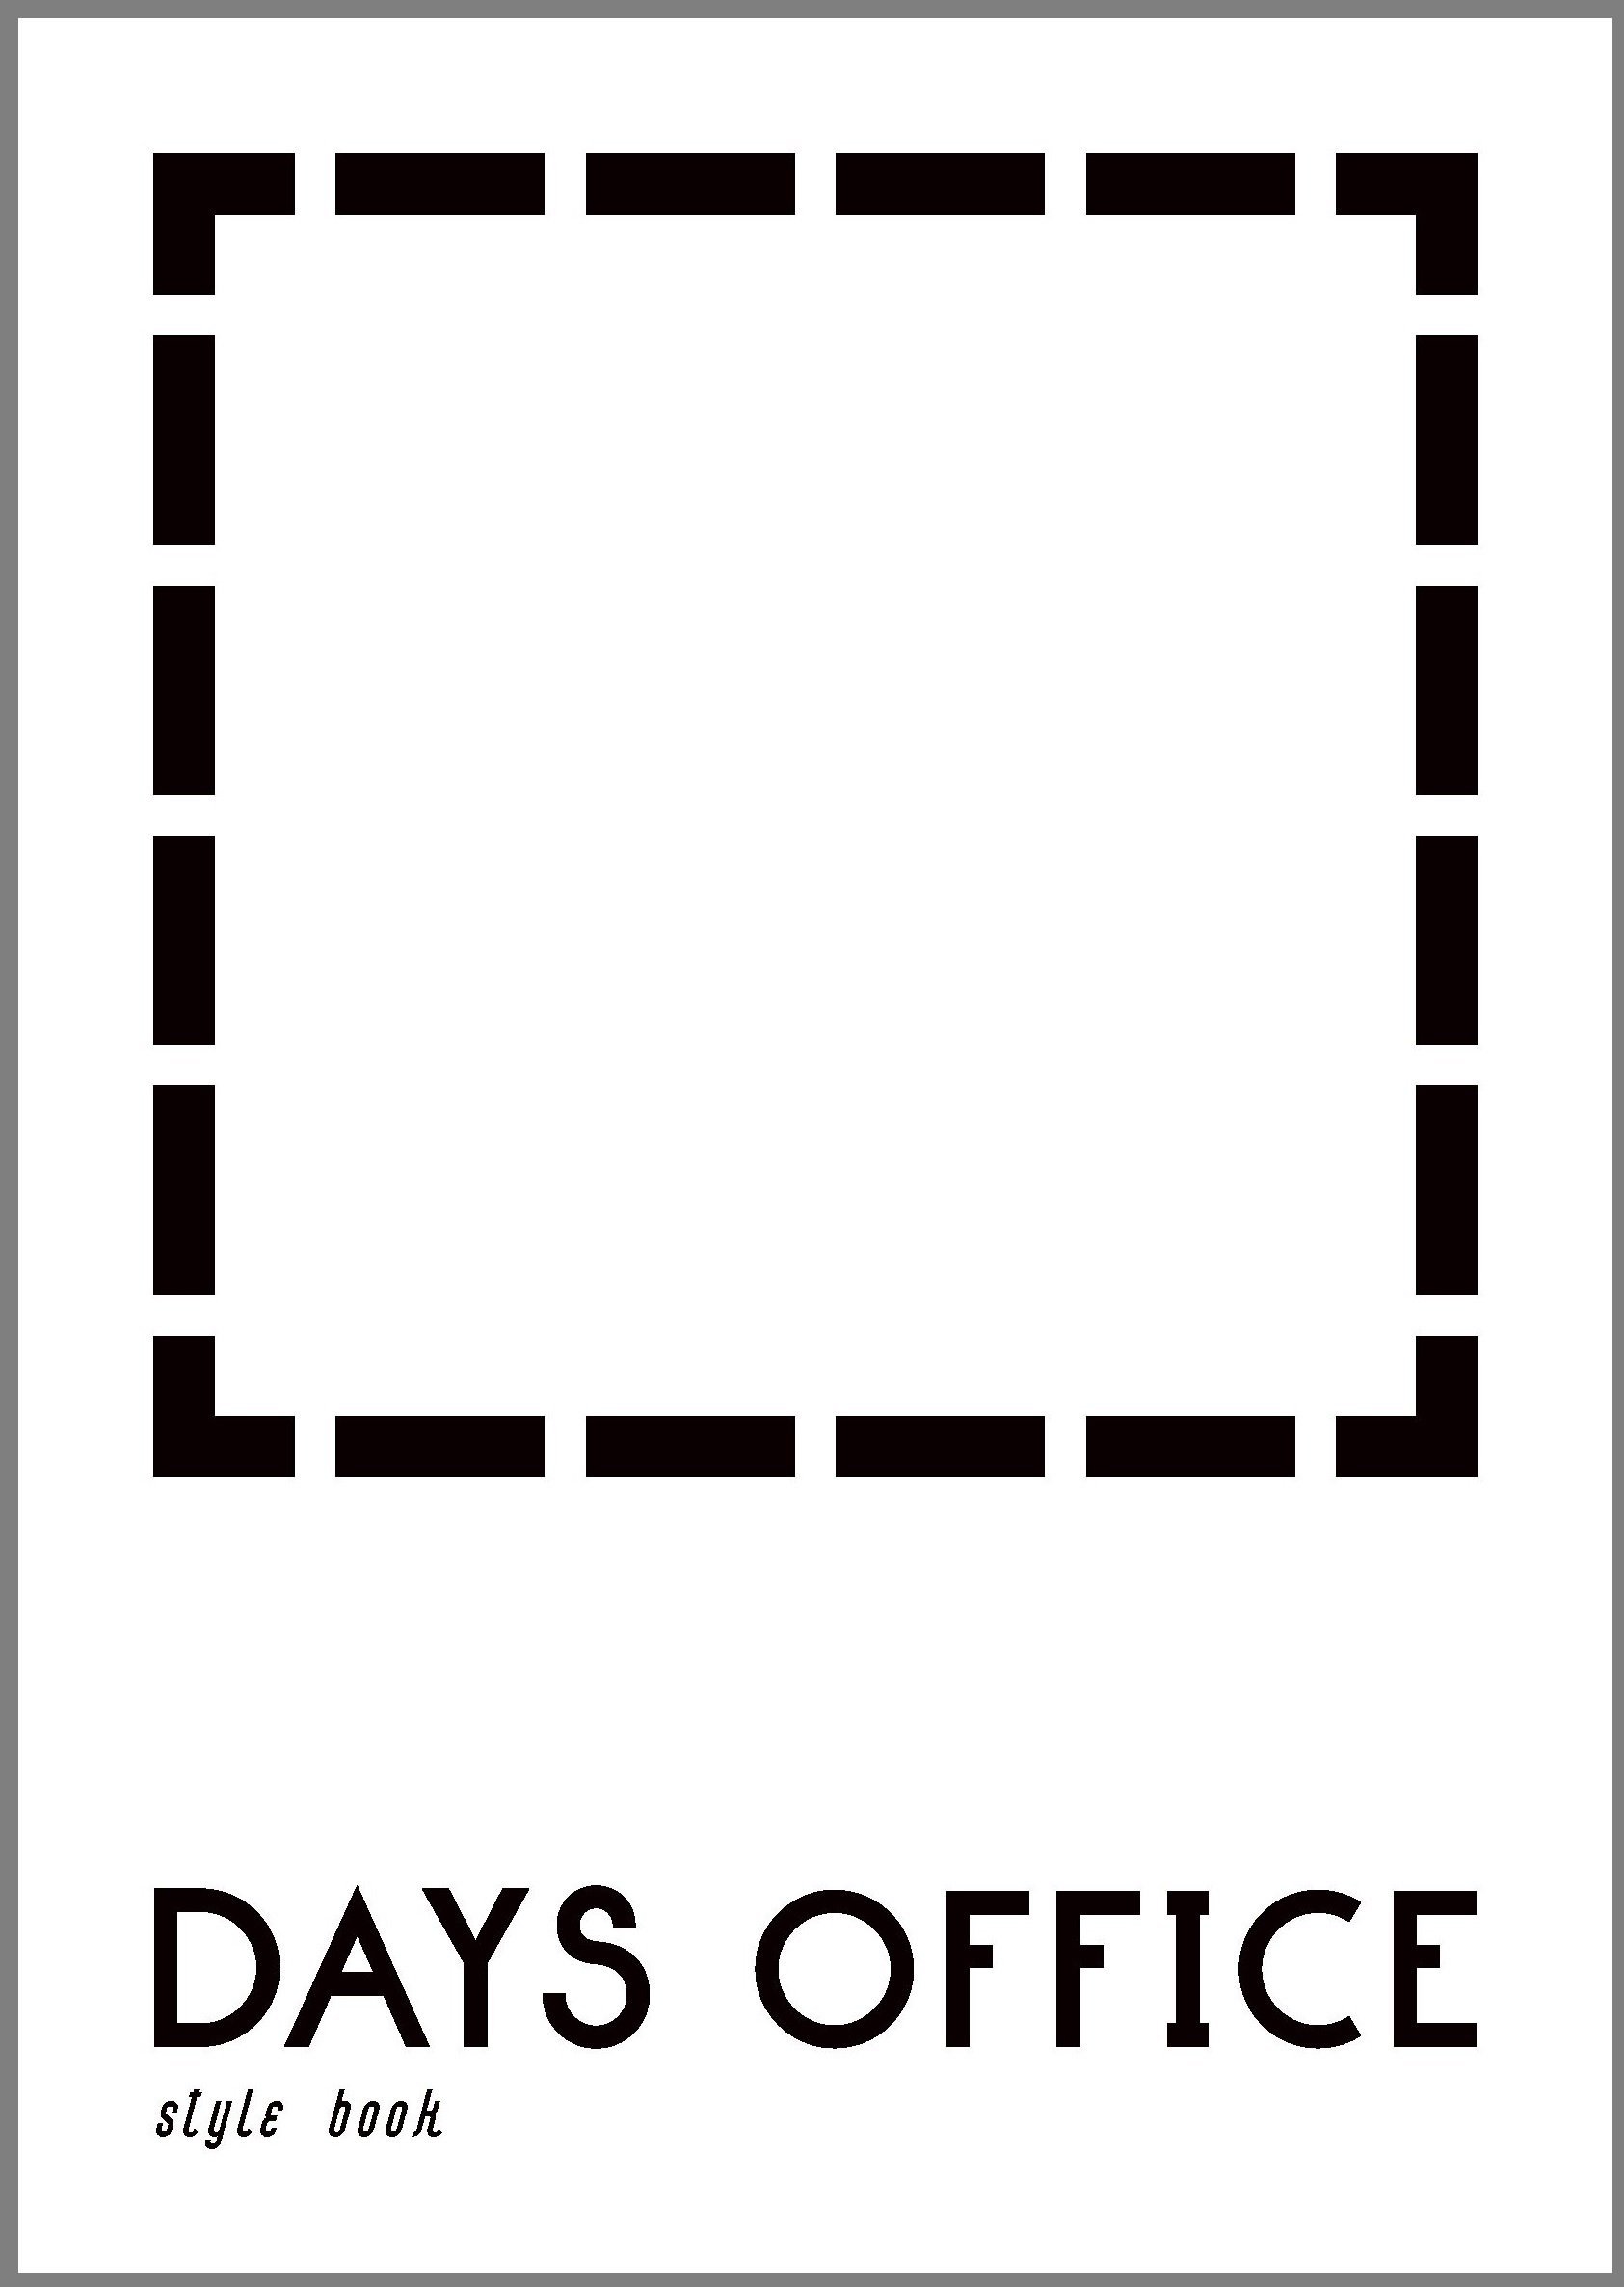 DAYS OFFICE STYLE BOOK Vol.6.1